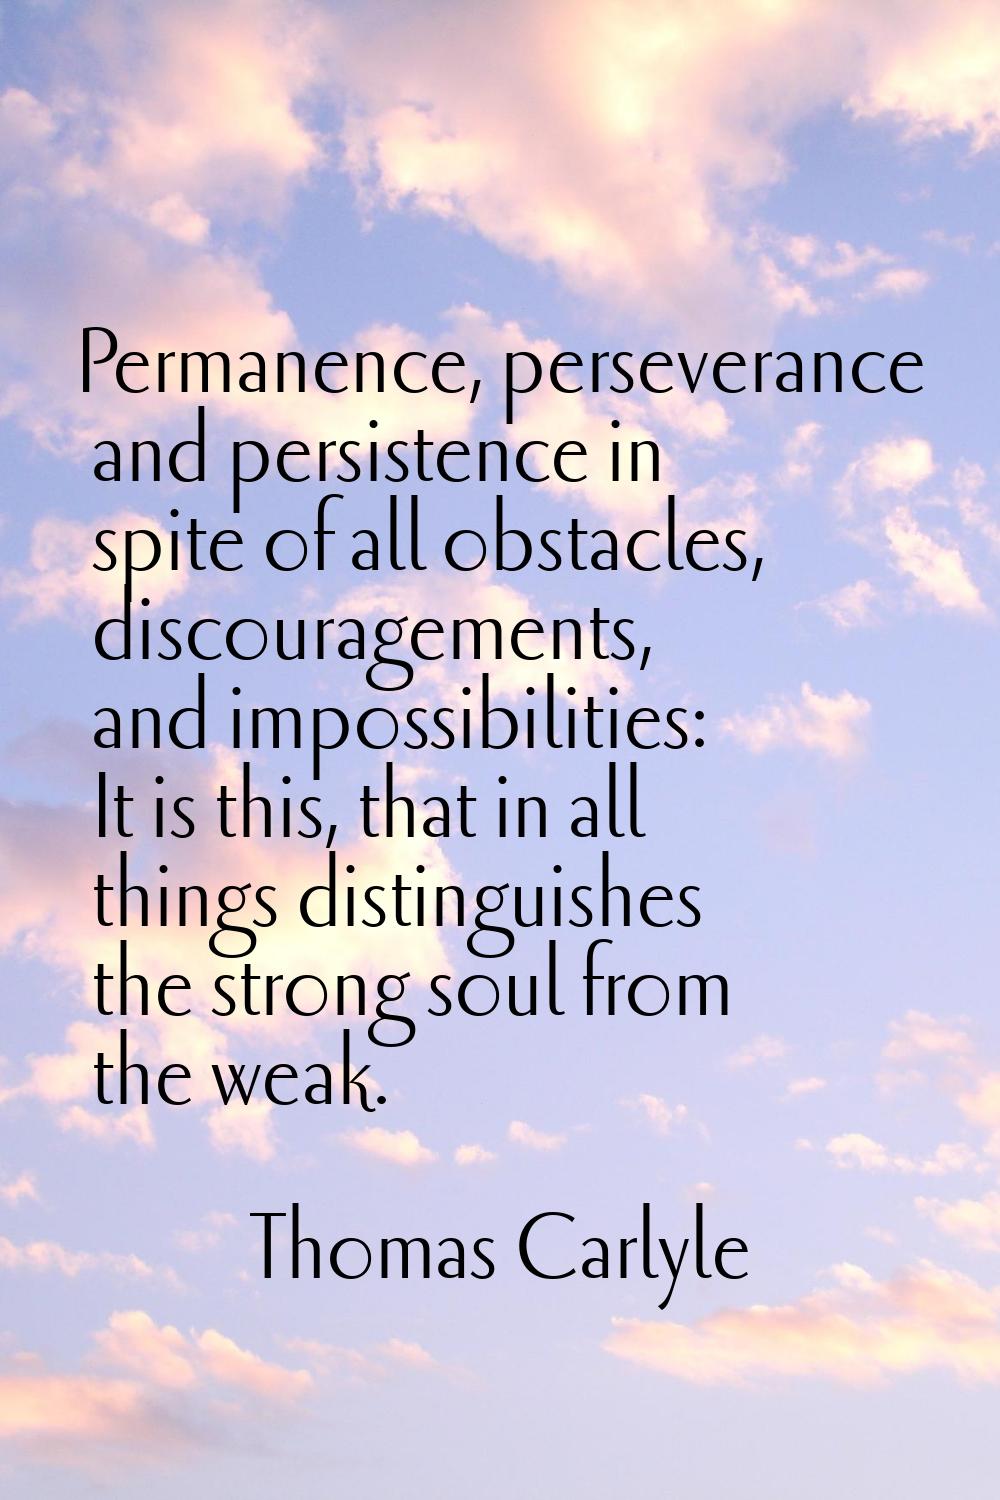 Permanence, perseverance and persistence in spite of all obstacles, discouragements, and impossibil